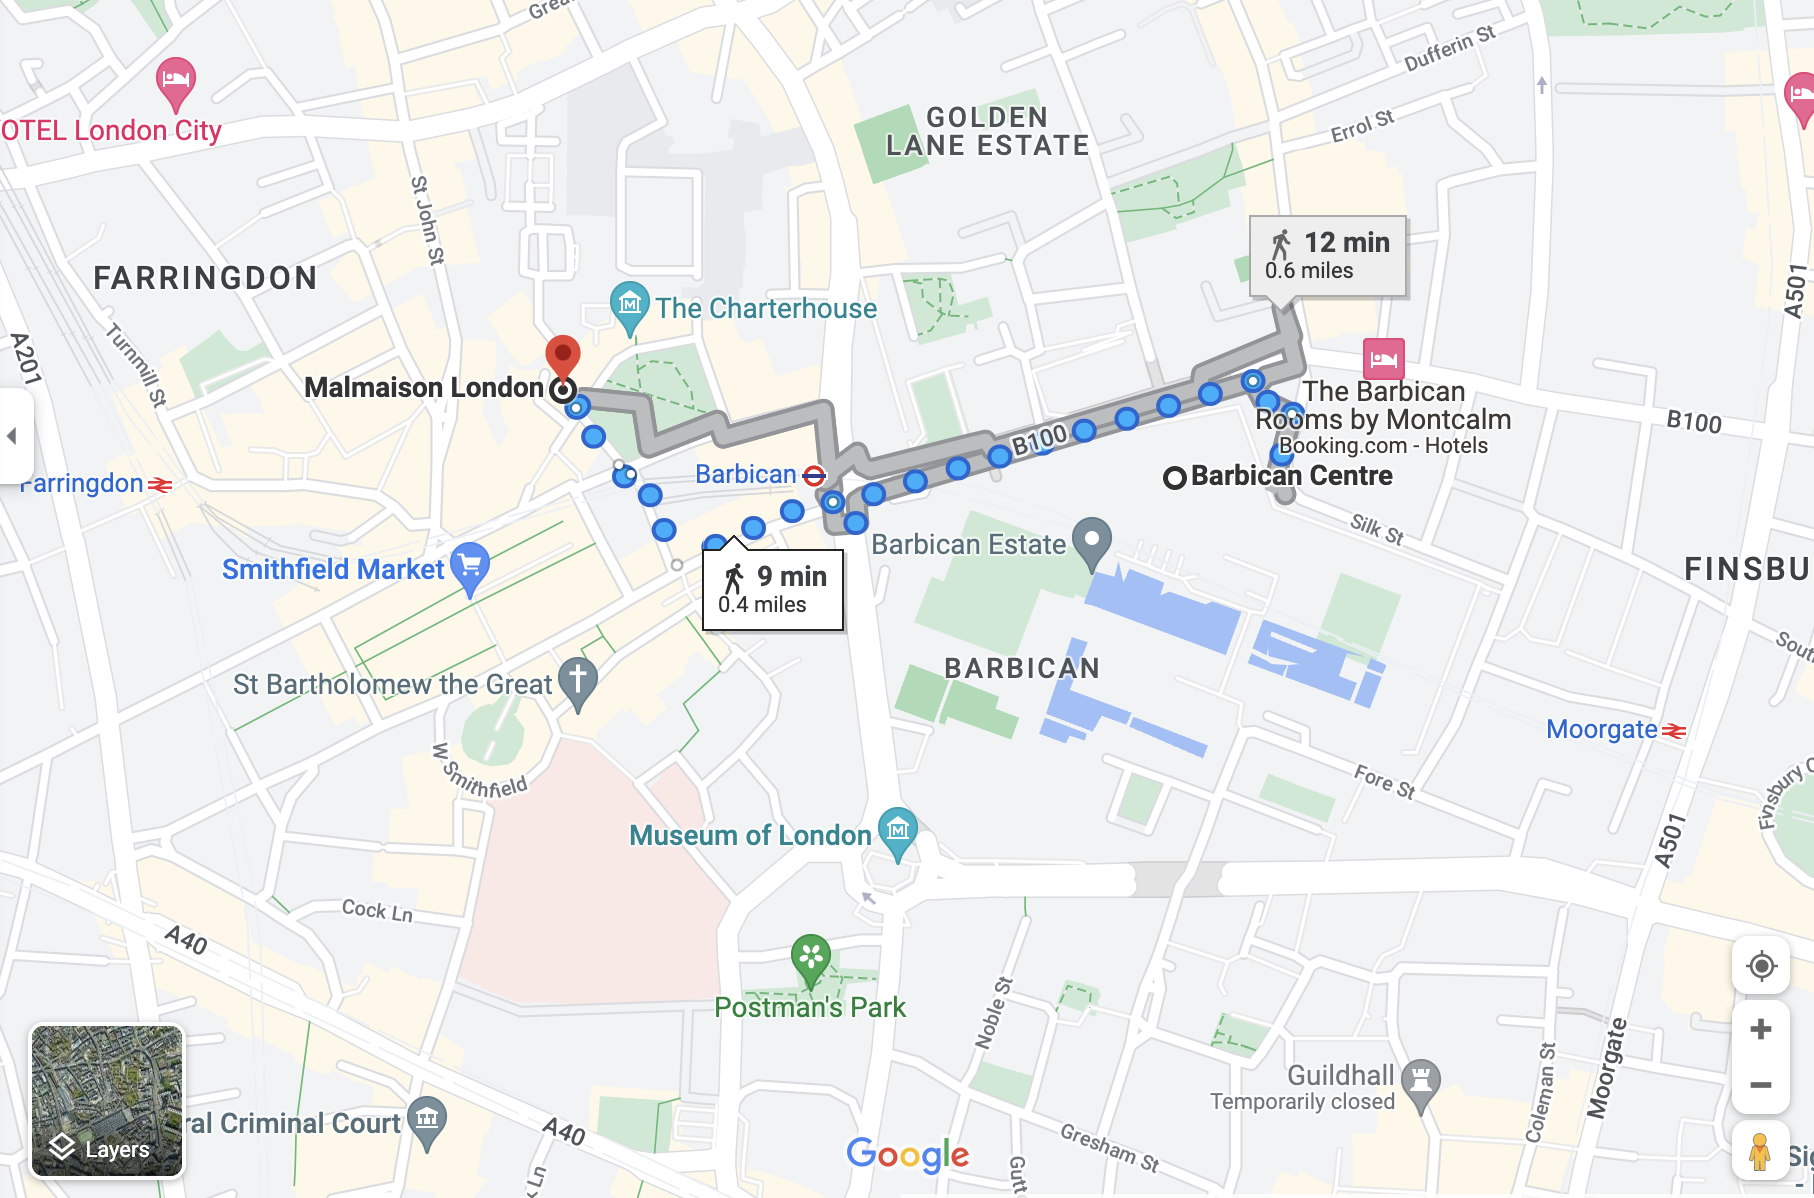 Google maps directions from Barbican Centre to Malmaison London